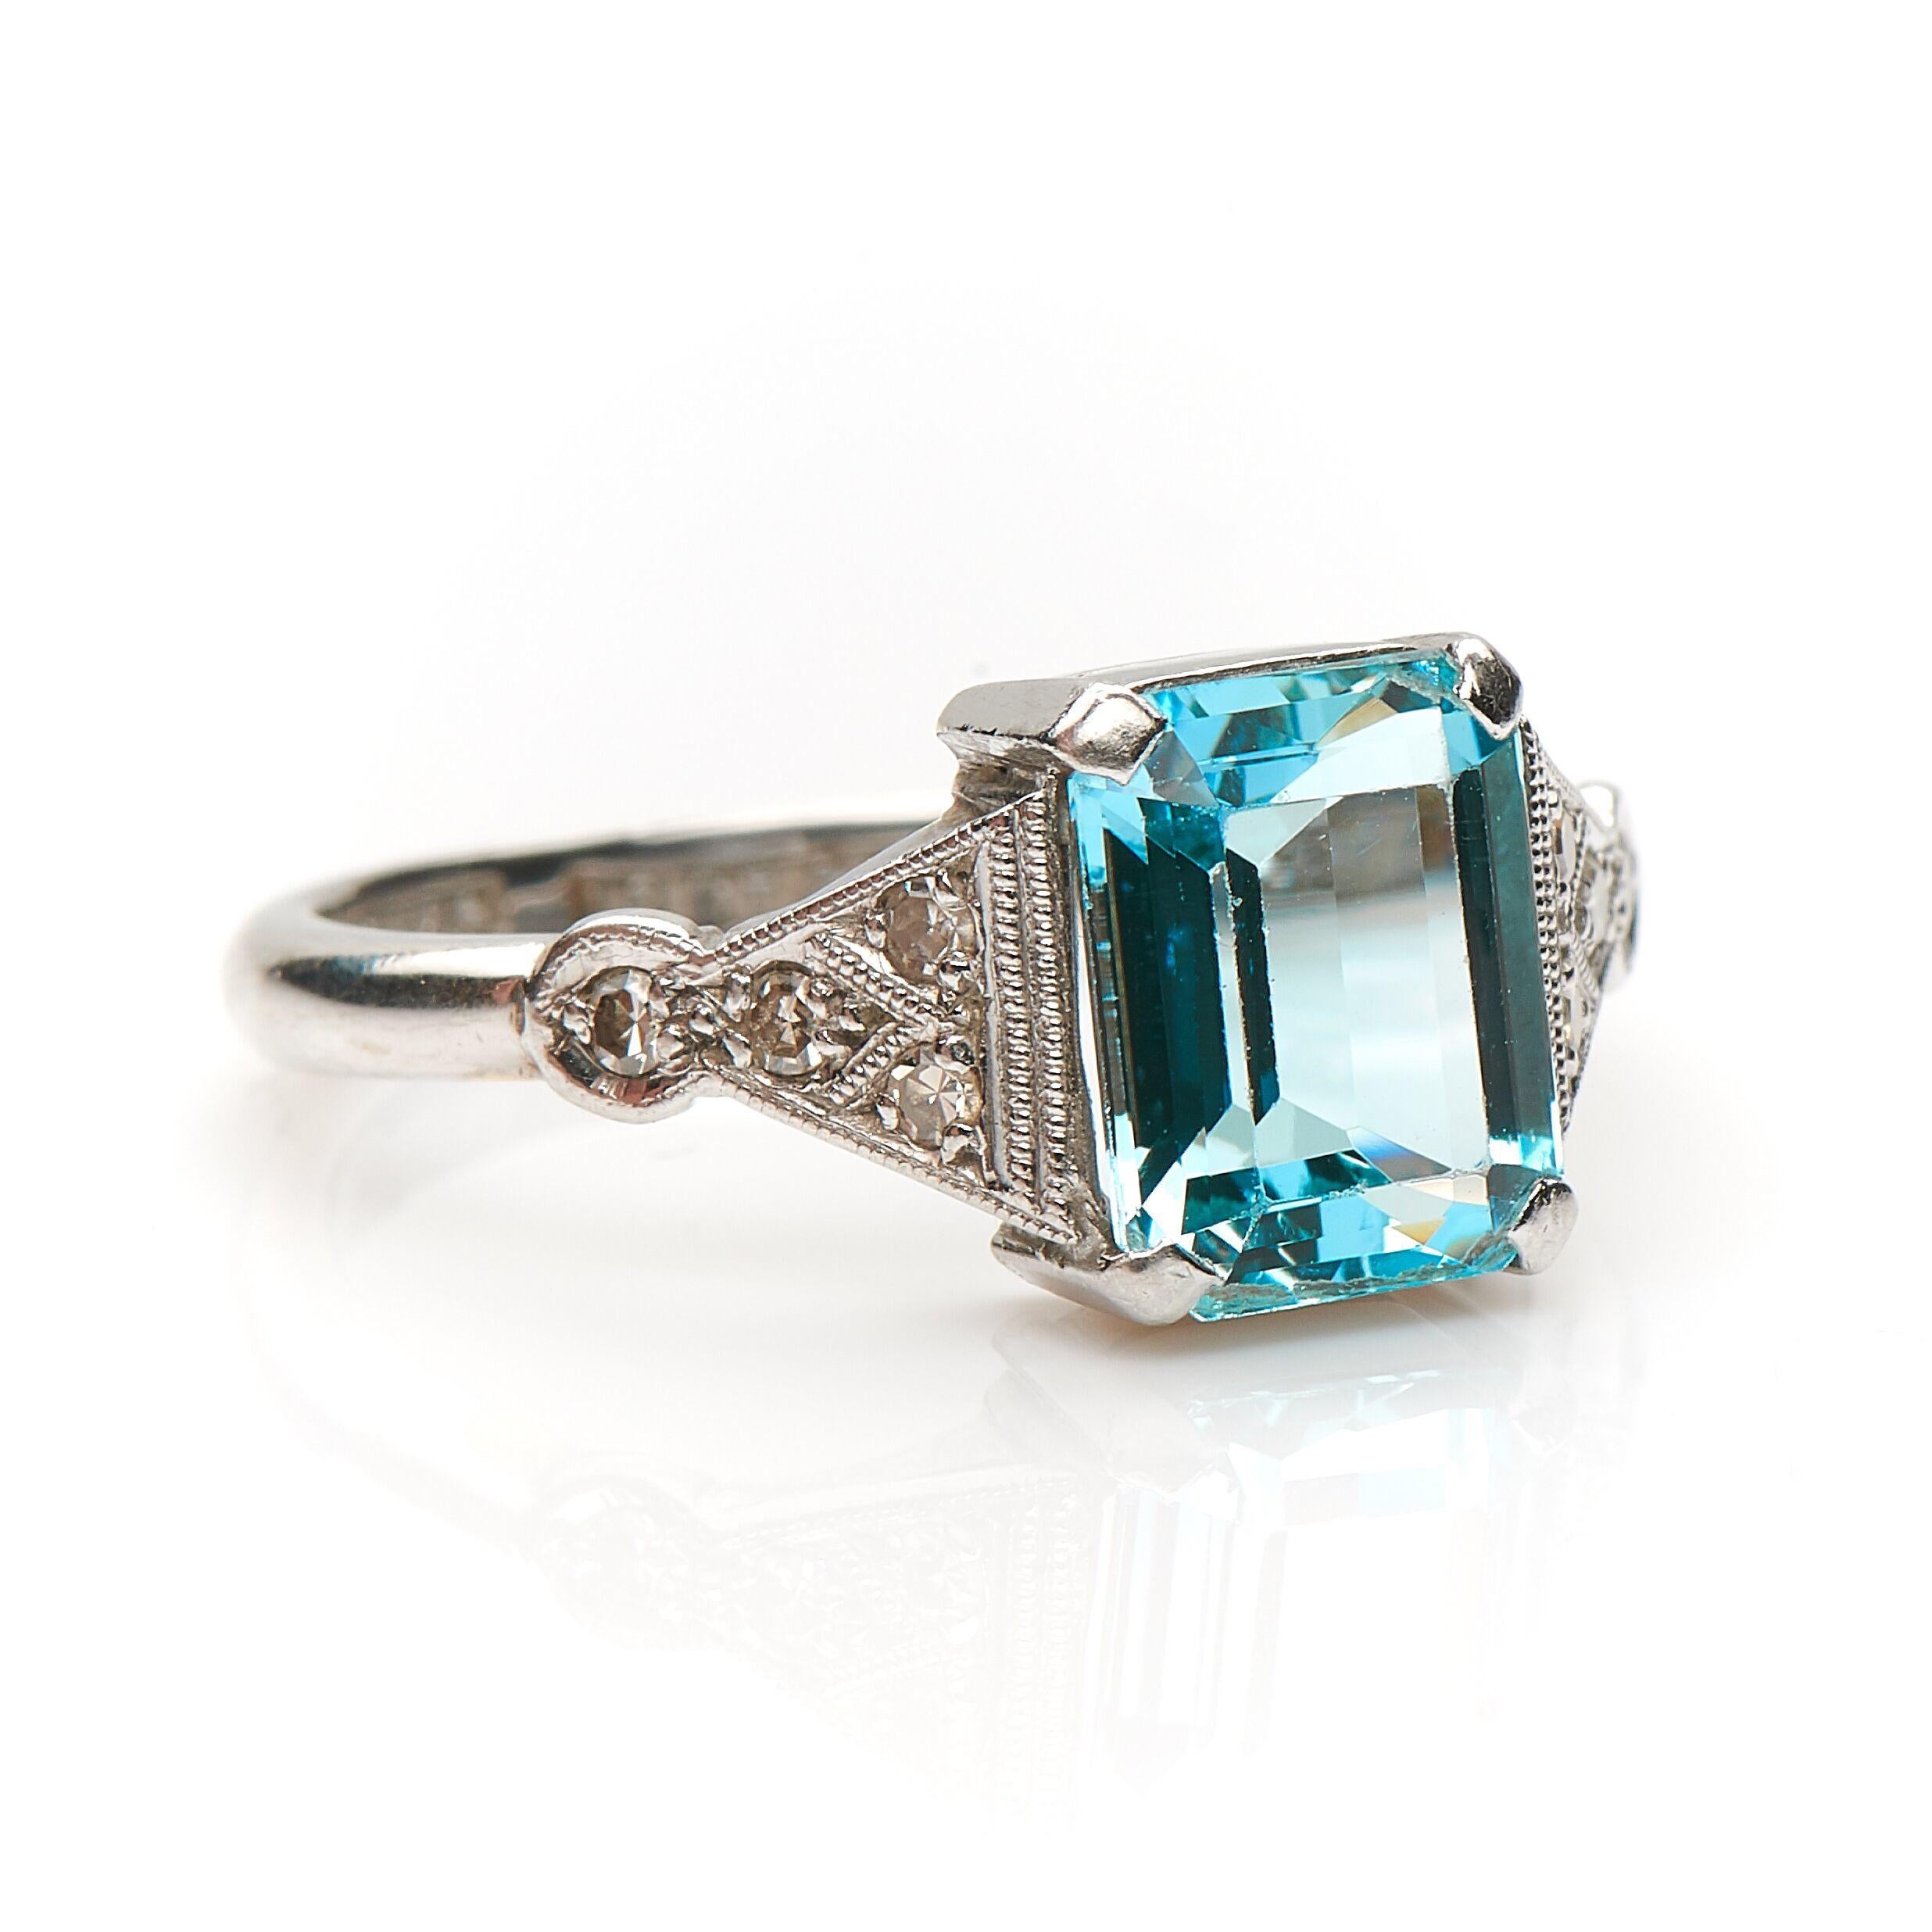 Art Deco, aquamarine and diamond ring, circa 1930. Set to centre a step-cut aquamarine flanked by trumpeting diamond set shoulders all finely finished with millegrain boarders. The aquamarine is a very pretty hue of blue, it creates a beautiful